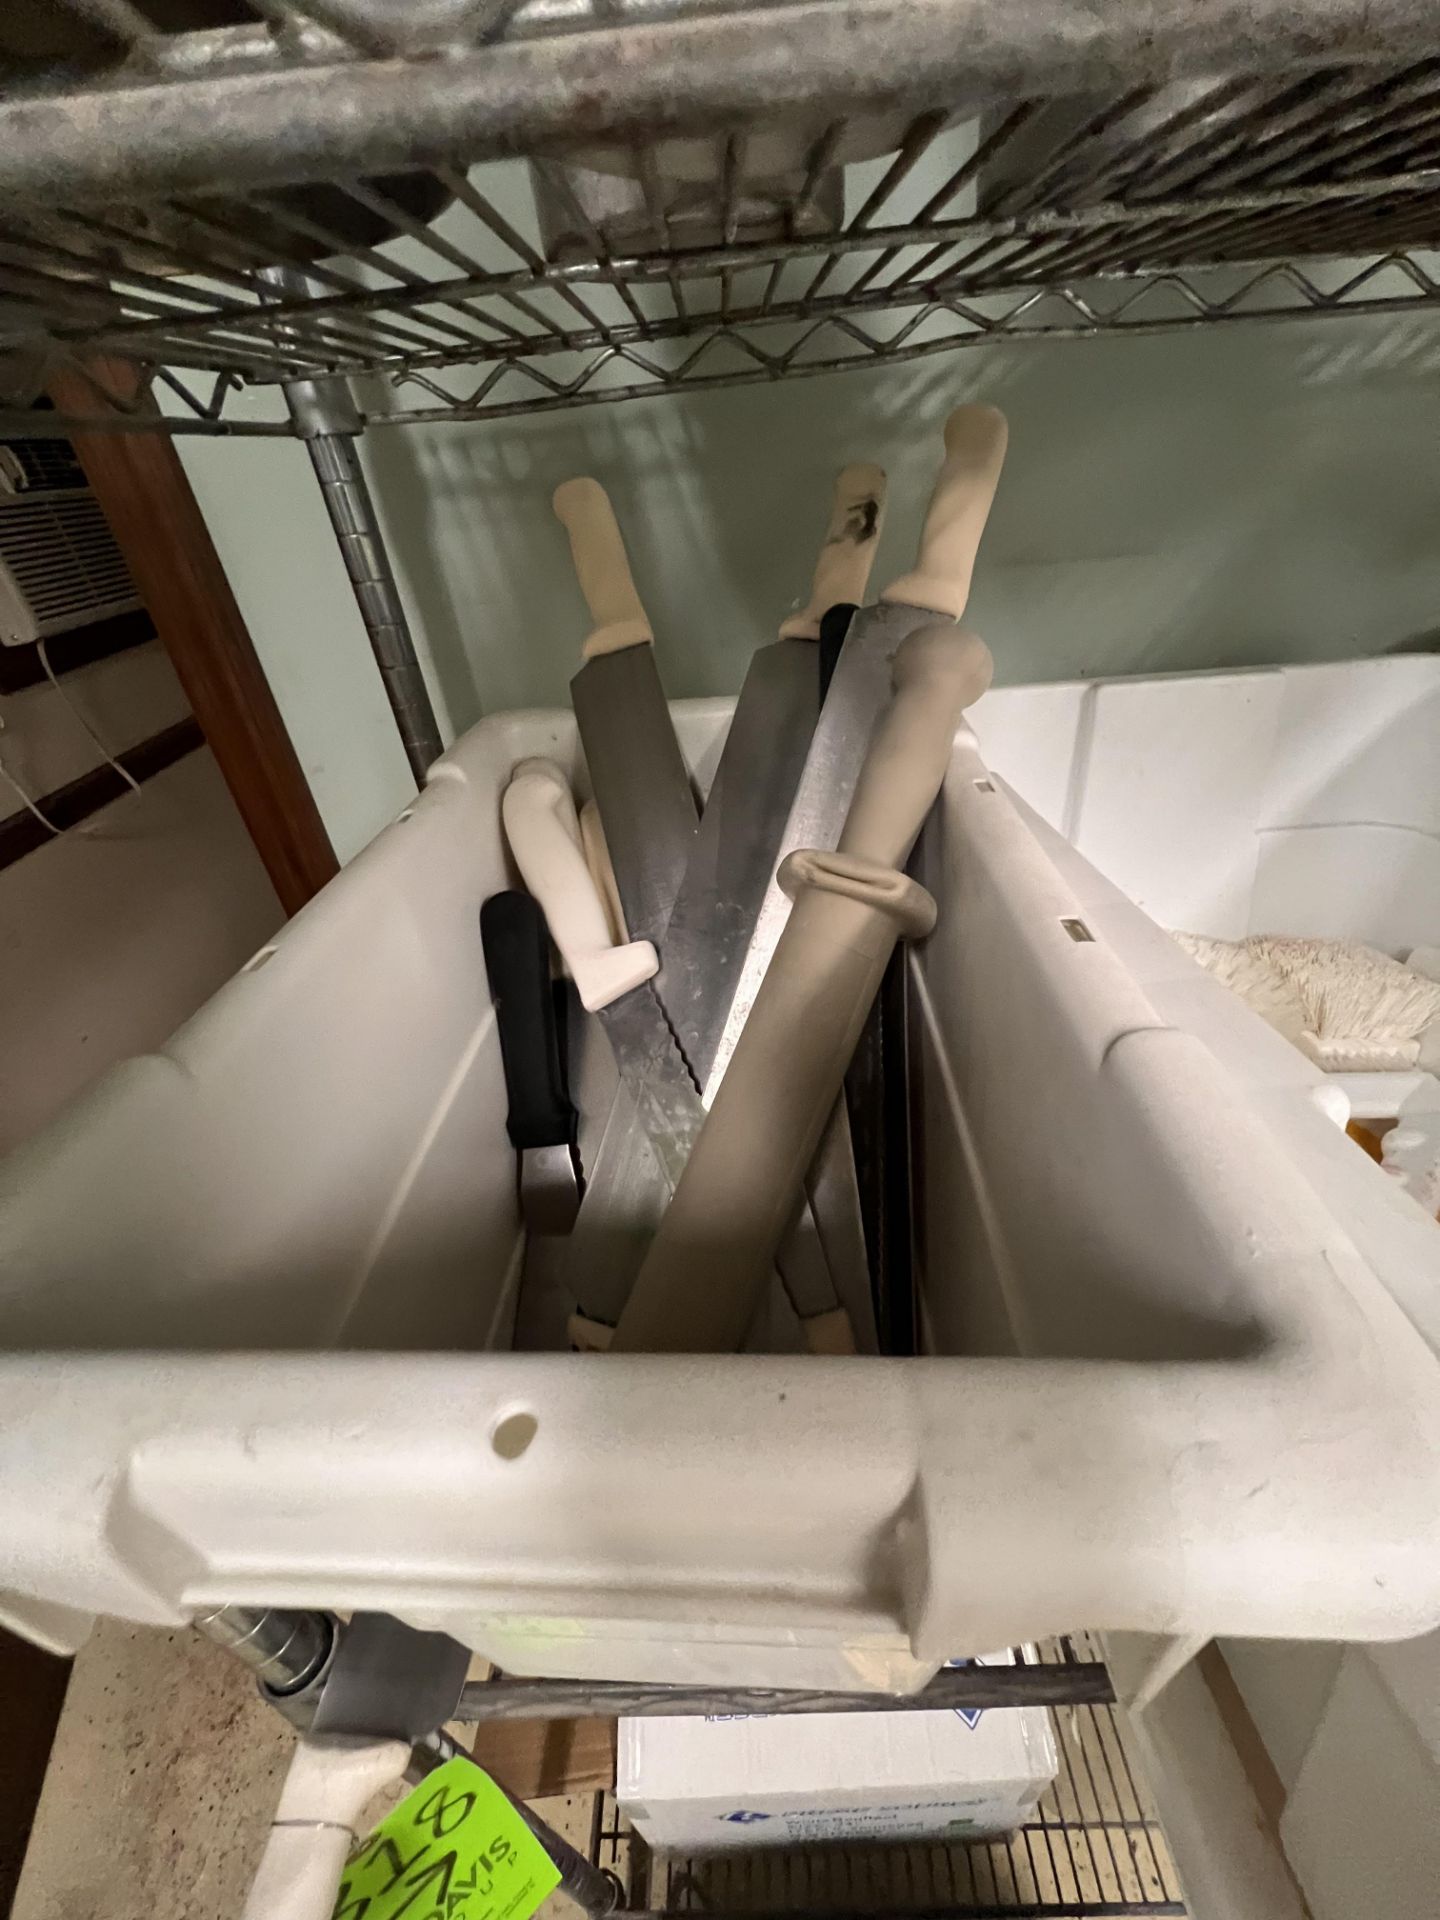 KITCHEN SUPPLIES LOCATED ON (2) RACKS, INCLUDES SCOOPS, KNIVES, SCRAPPERS, STRAINERS AND MORE - Image 2 of 7